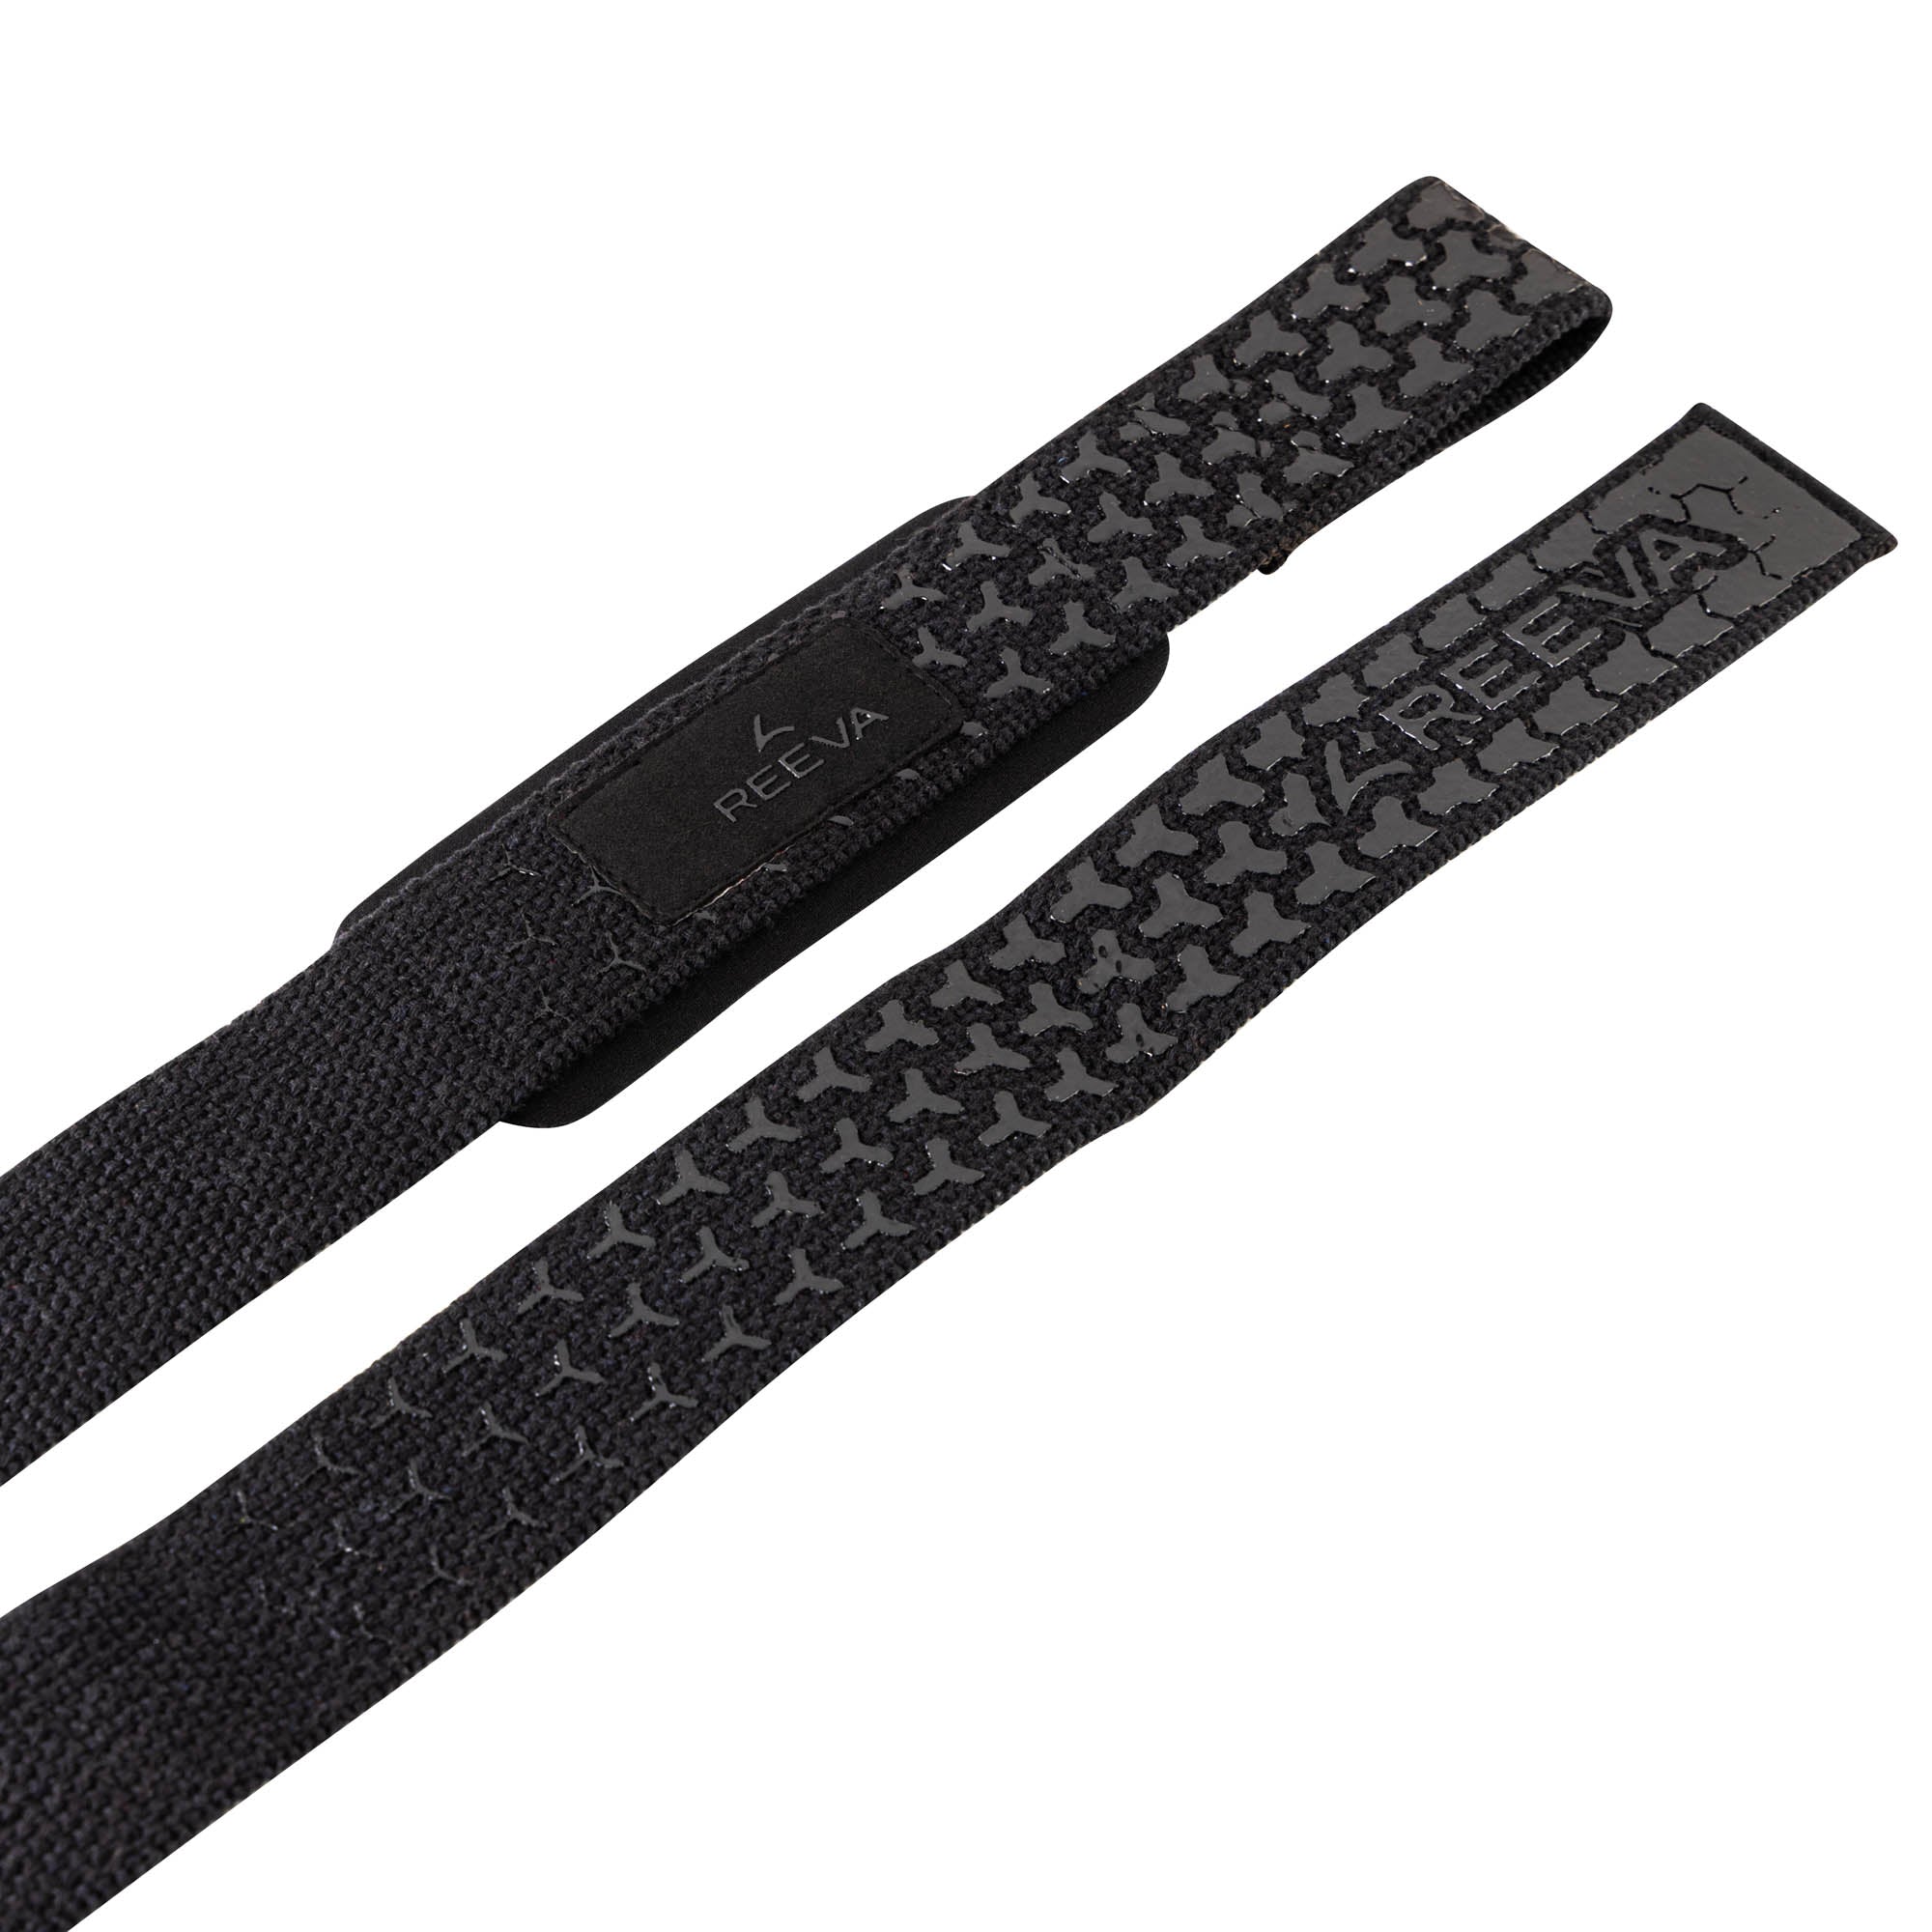 Lifting Straps ultra grip - Lifting Straps with padding